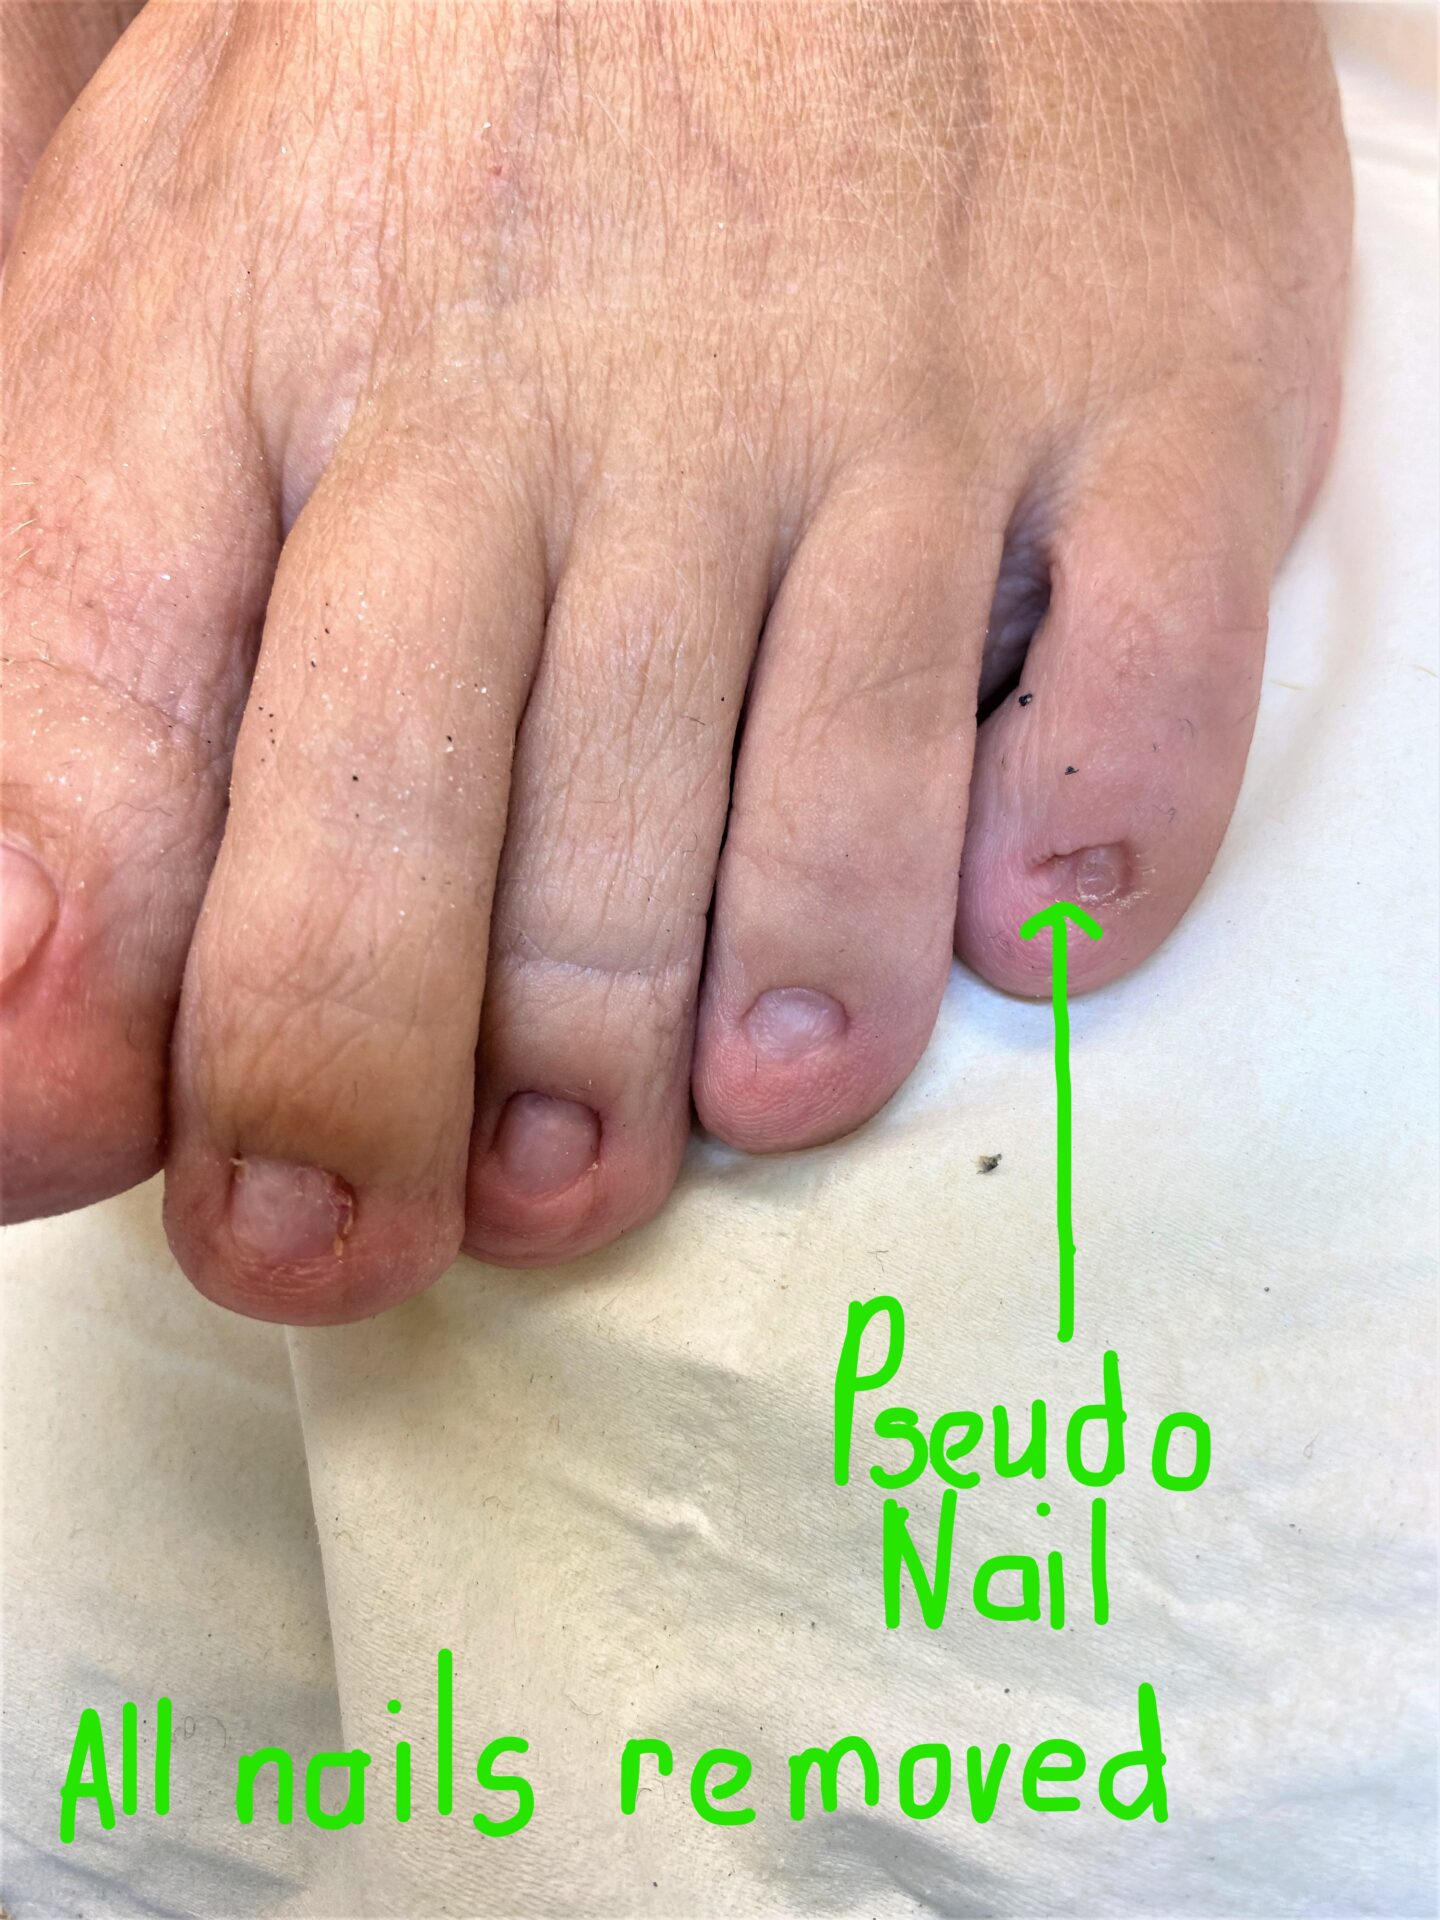 Toenail Problems: Symptoms, Causes, and Treatments